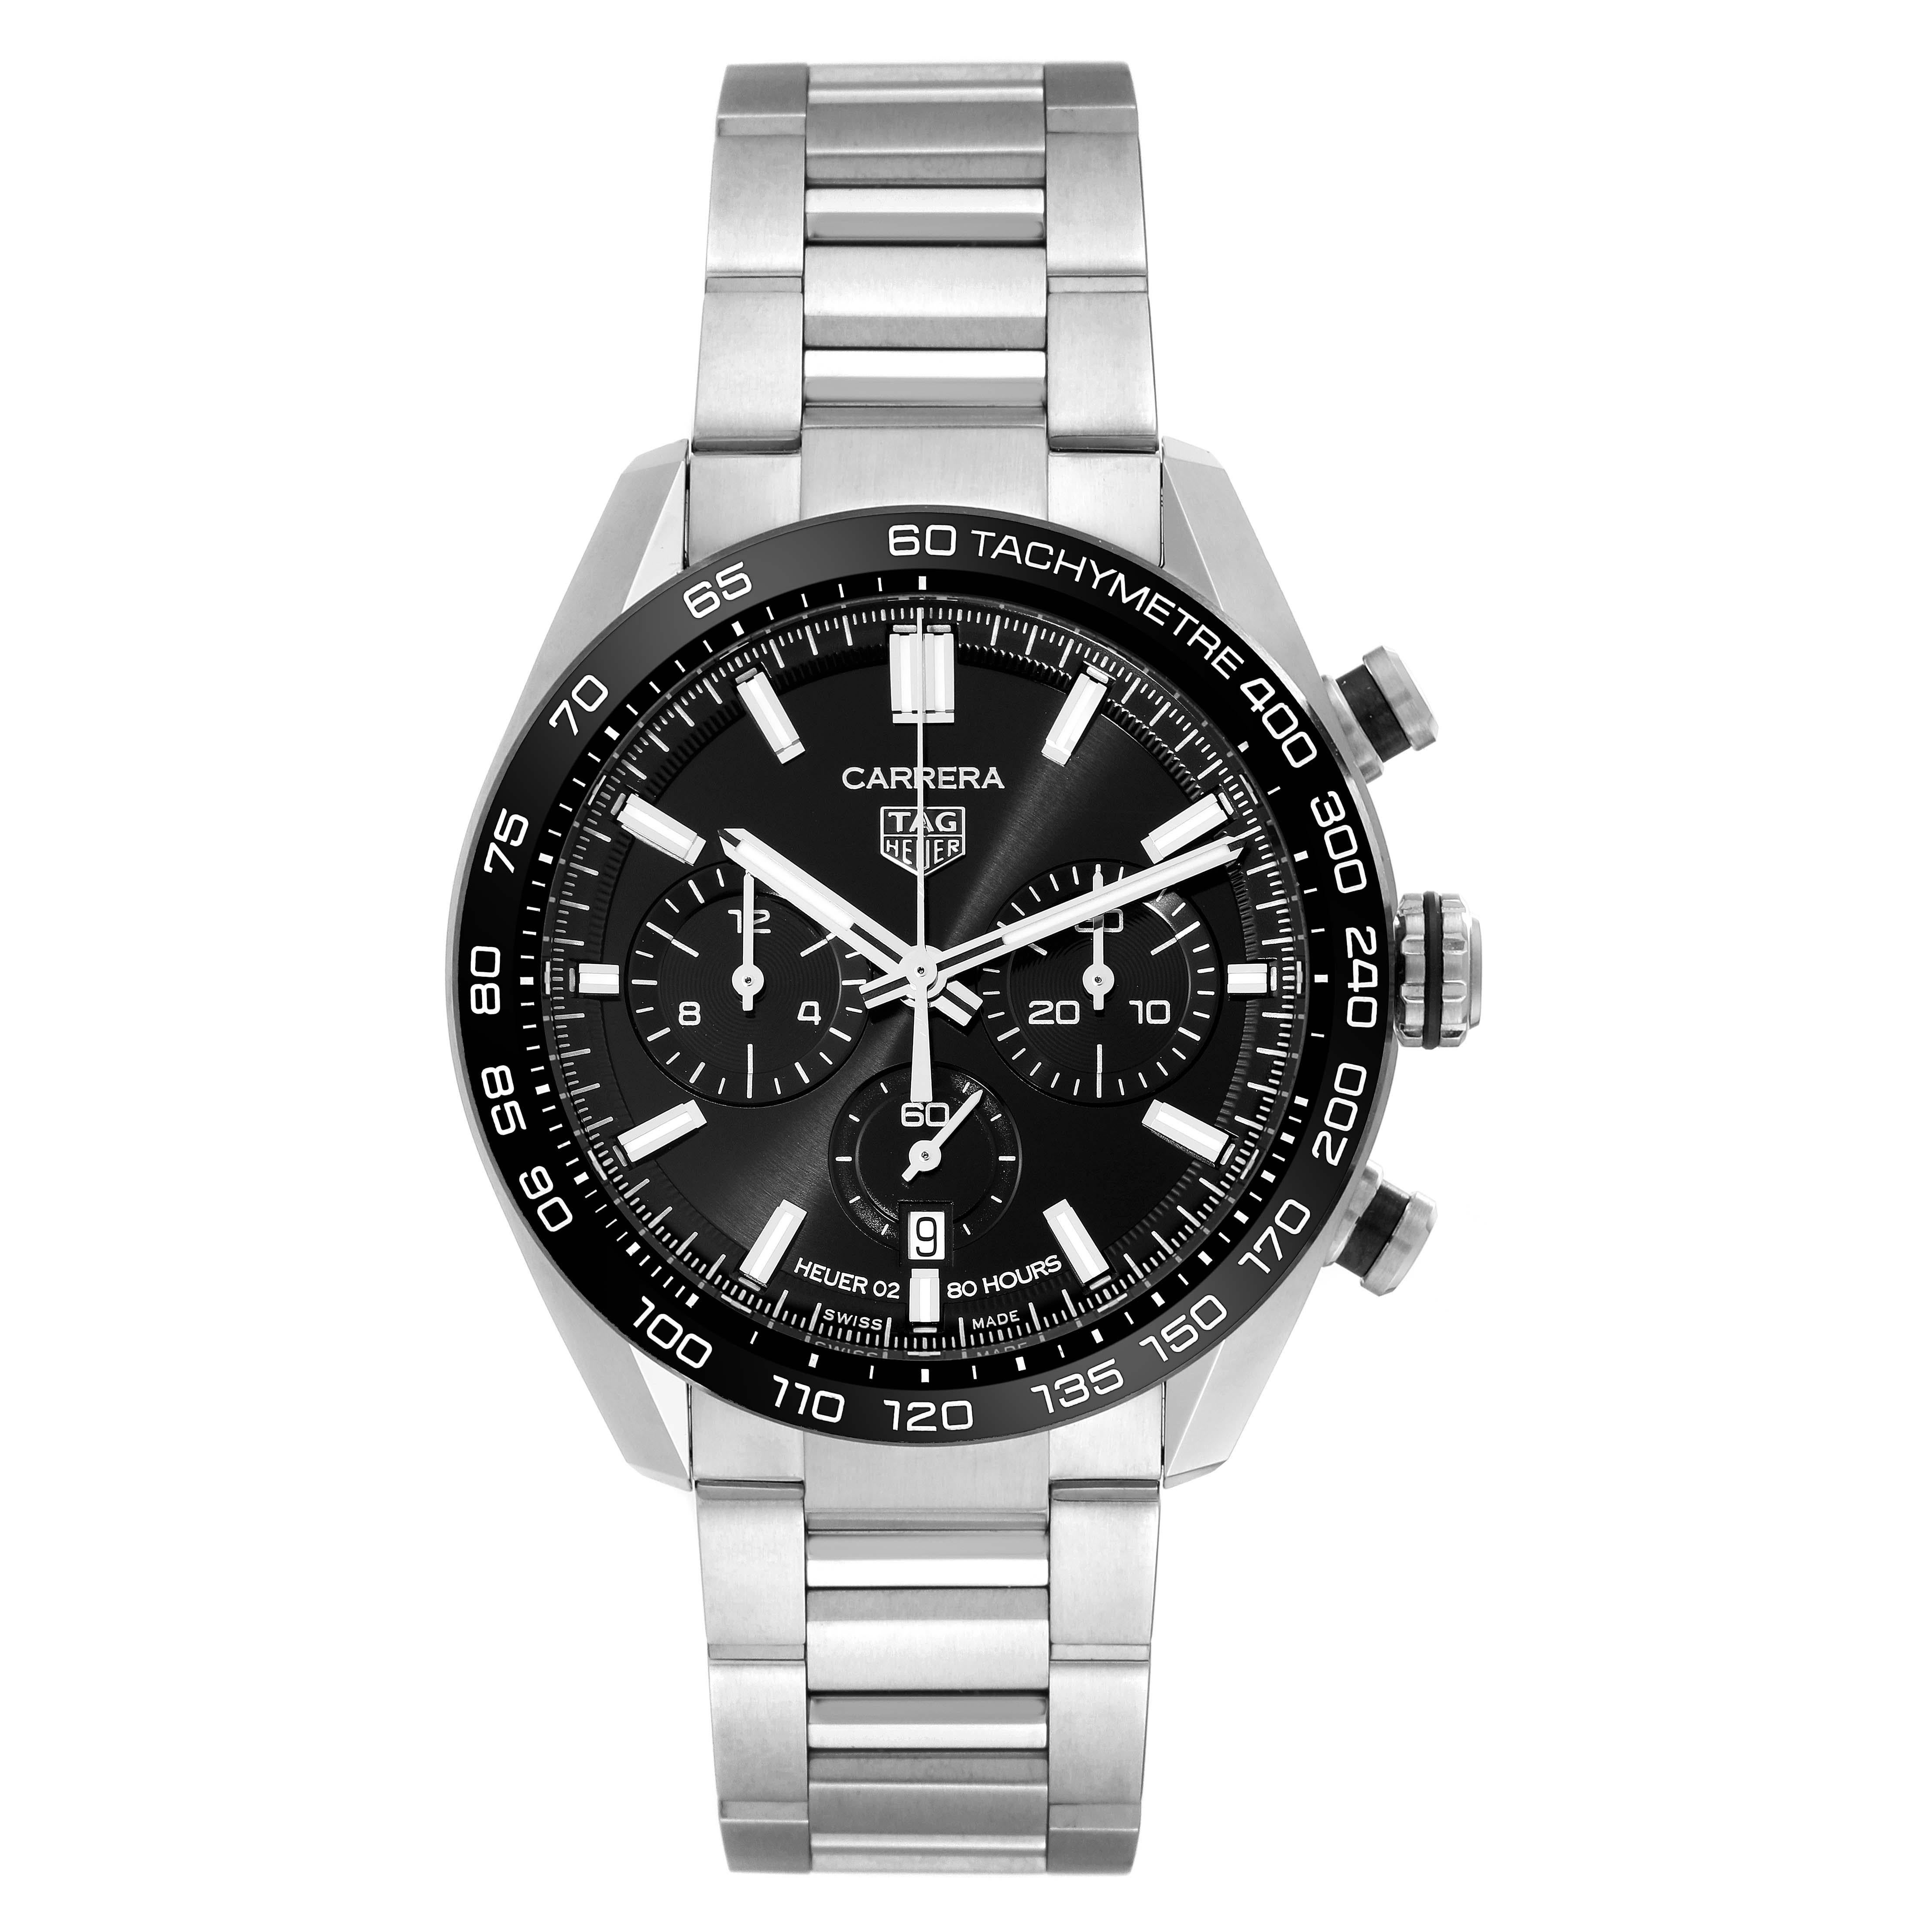 Tag Heuer Carrera Chronograph Black Dial Steel Mens Watch CBN2A1B Unworn. Automatic self-winding chronograph movement. Stainless steel round case 44.0 mm. Transparent exhibition sapphire crystal case back. Black ceramic tachymeter scale bezel.